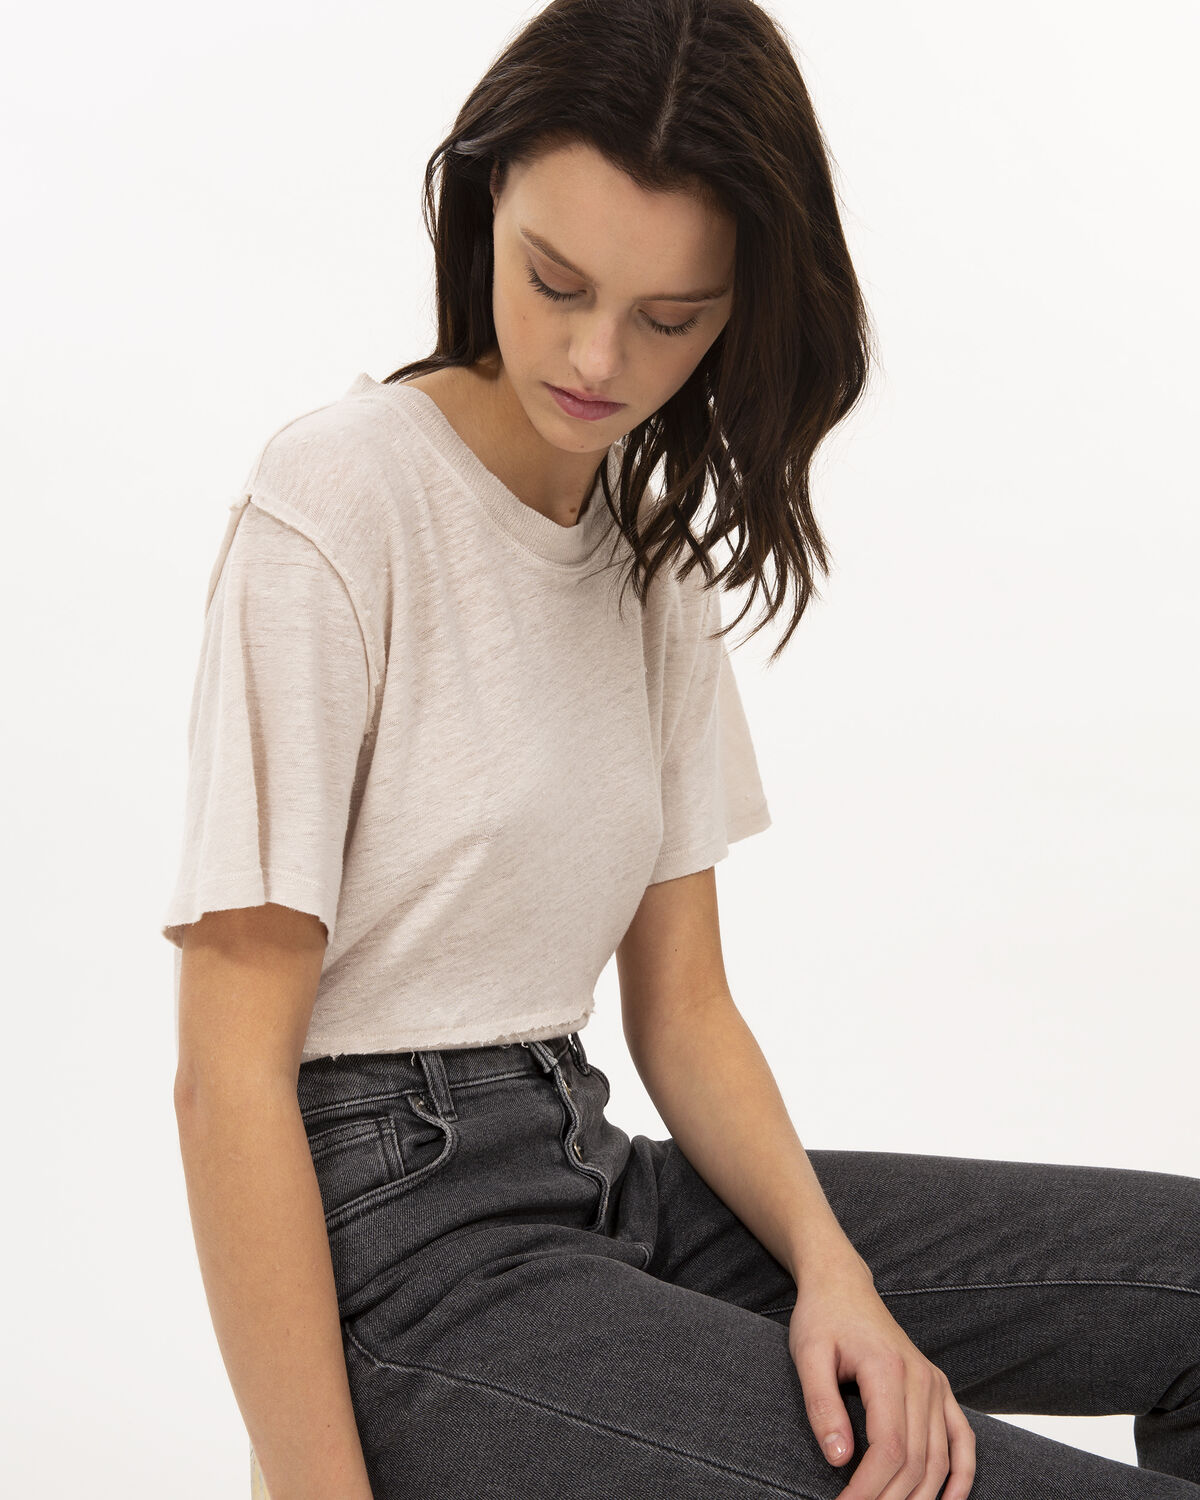 Photo of IRO Paris Spire T-Shirt Light Brown And Ecru - This Linen T-shirt Is A Basic Part Of The Women's Dressing Room. Its Plus? Its Visible Seams On The Sleeves And Pelvis Will Enhance Your Silhouette. Wear It With High Waist Jeans And A Leather Skirt For A Resolutely Rock Look. New In